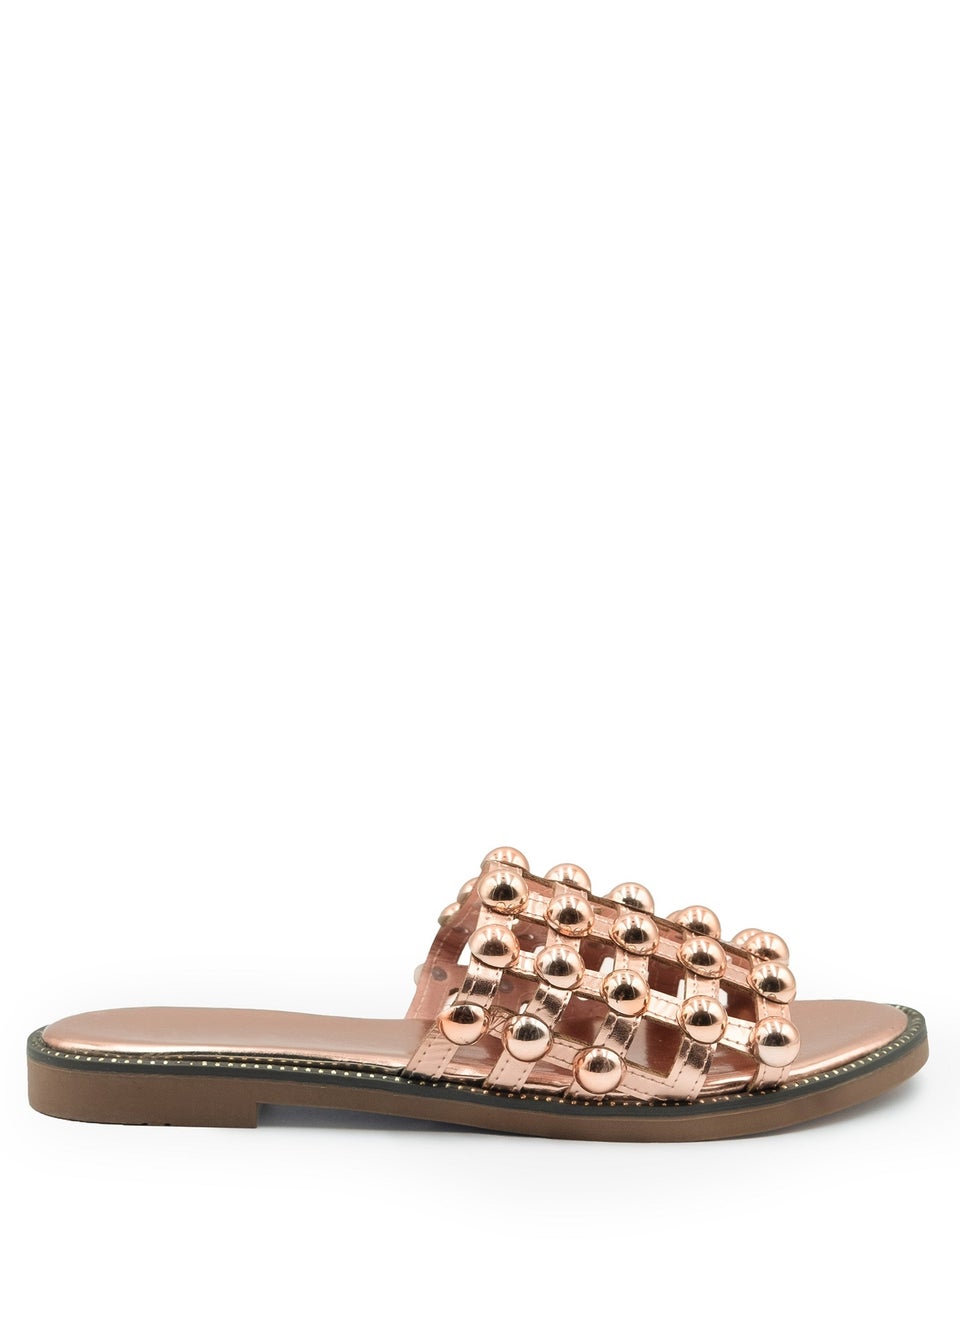 Where's That From Rosegold Pu Kelly Sliders With Studded Detailing